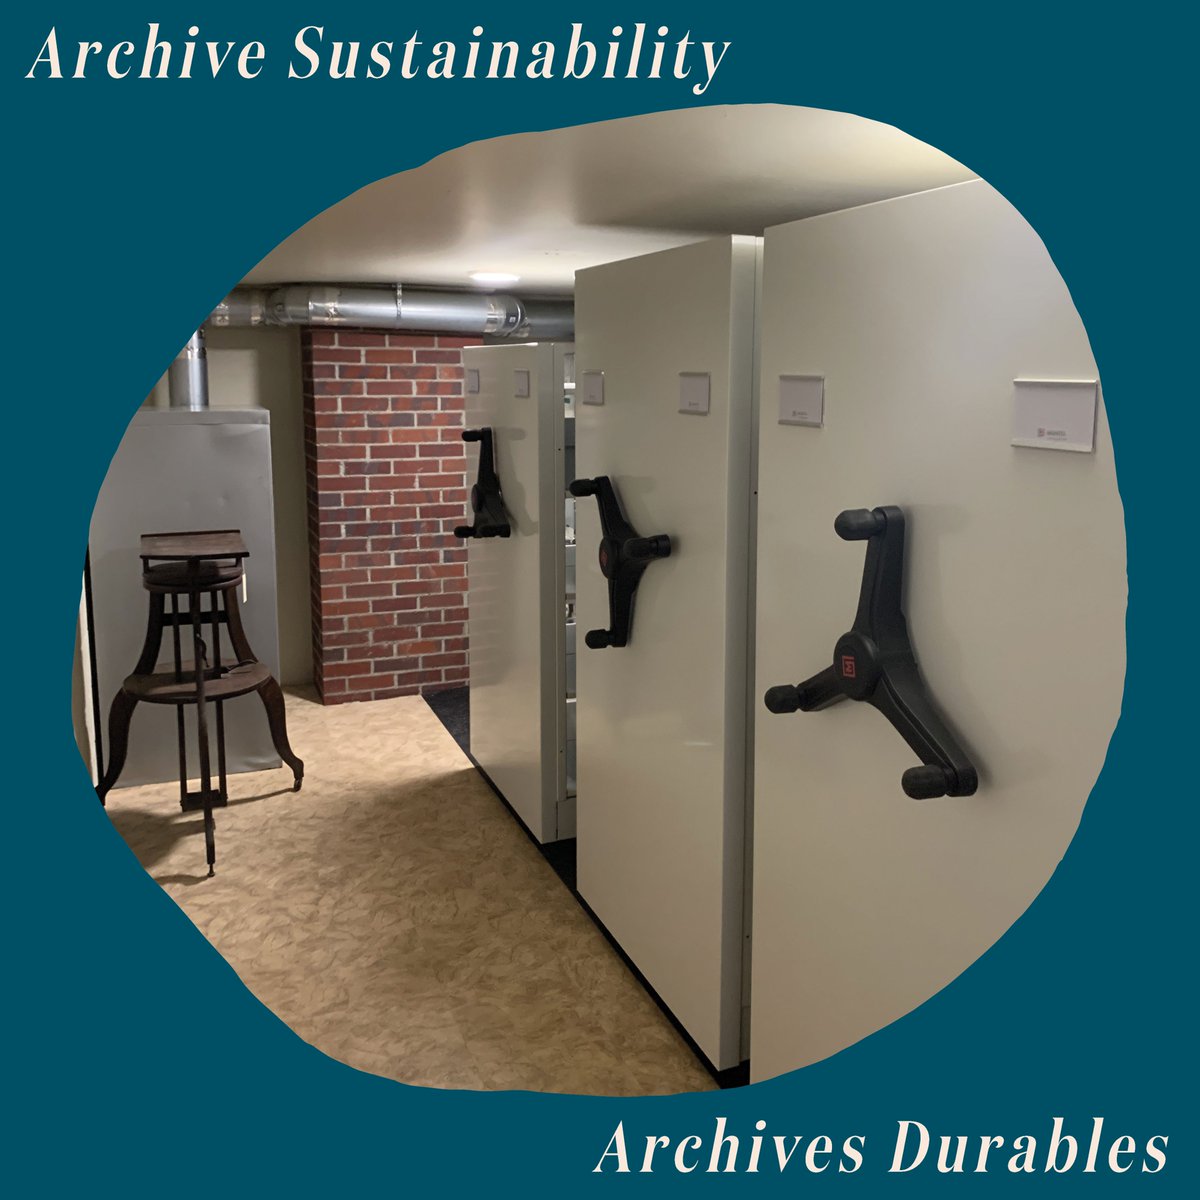 Our new mobile shelving not only helps us optimize our space but also manage long term preservation of our artefacts. We are actively seeking to establish the most sustainable conditions for our vast collections both in our museum and archives. #Archive30 #ArchiveSustainability